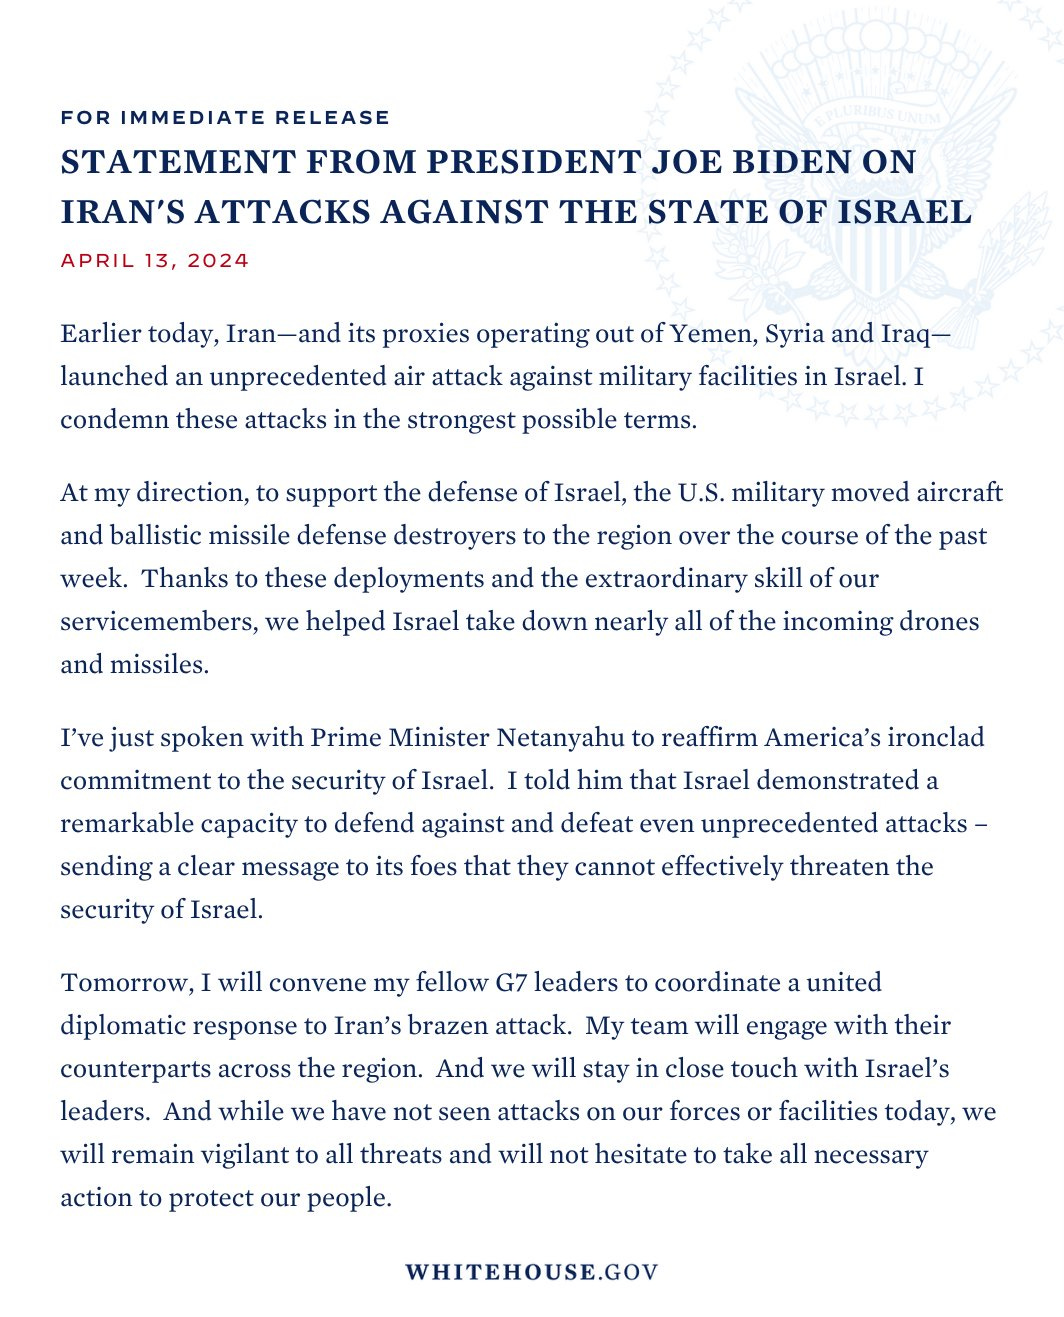 A Statement from President Joe Biden on Iran’s Attacks against the State of Israel.